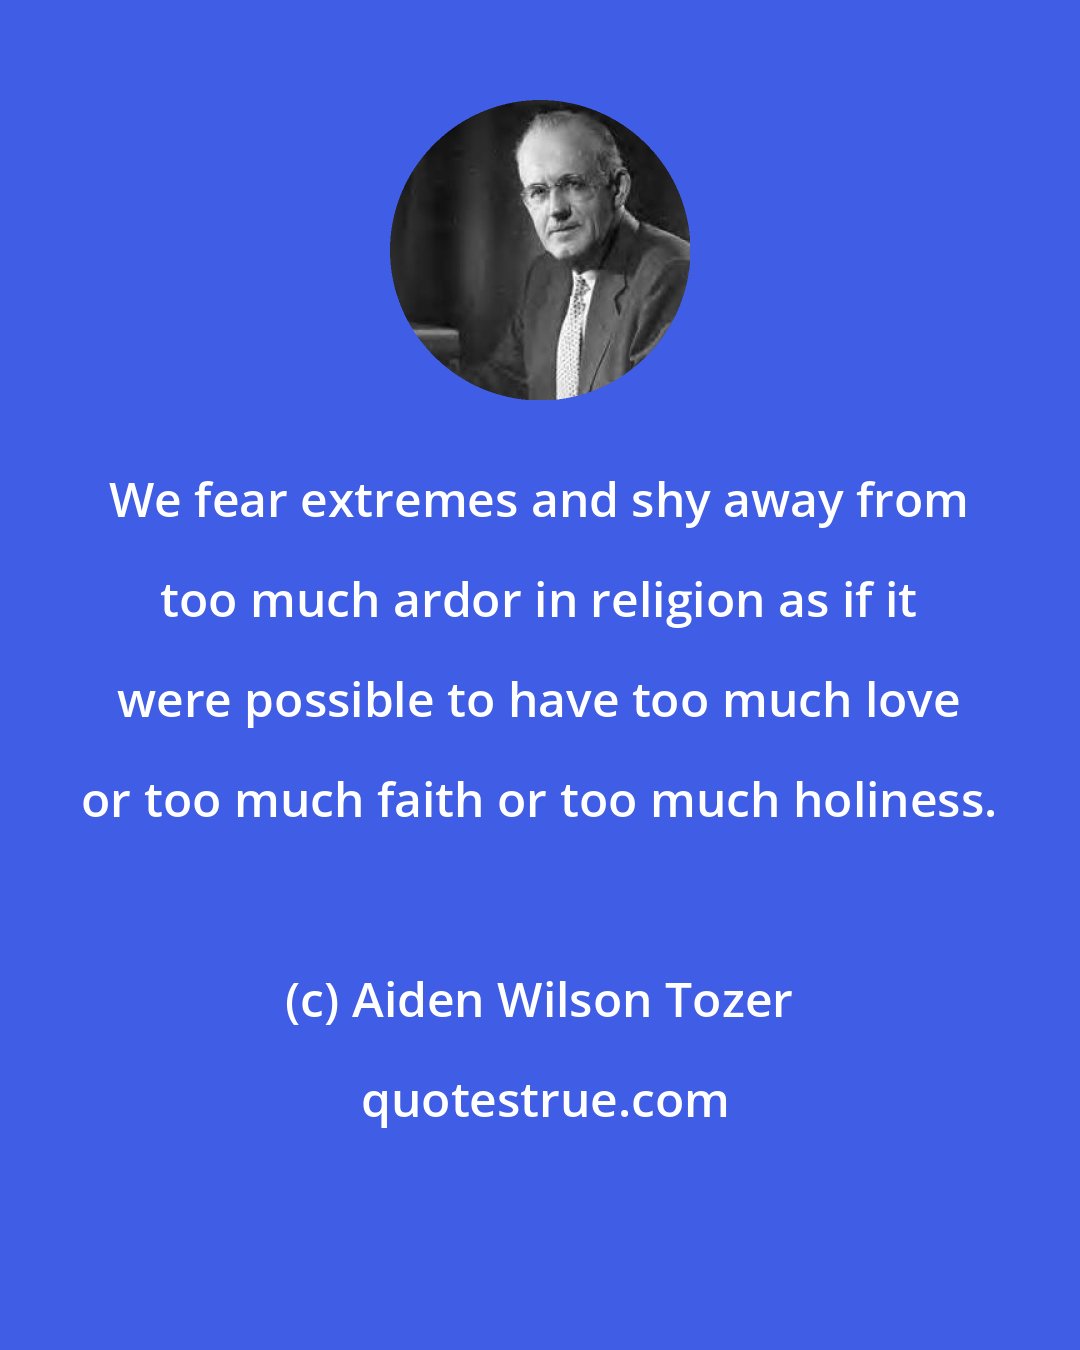 Aiden Wilson Tozer: We fear extremes and shy away from too much ardor in religion as if it were possible to have too much love or too much faith or too much holiness.